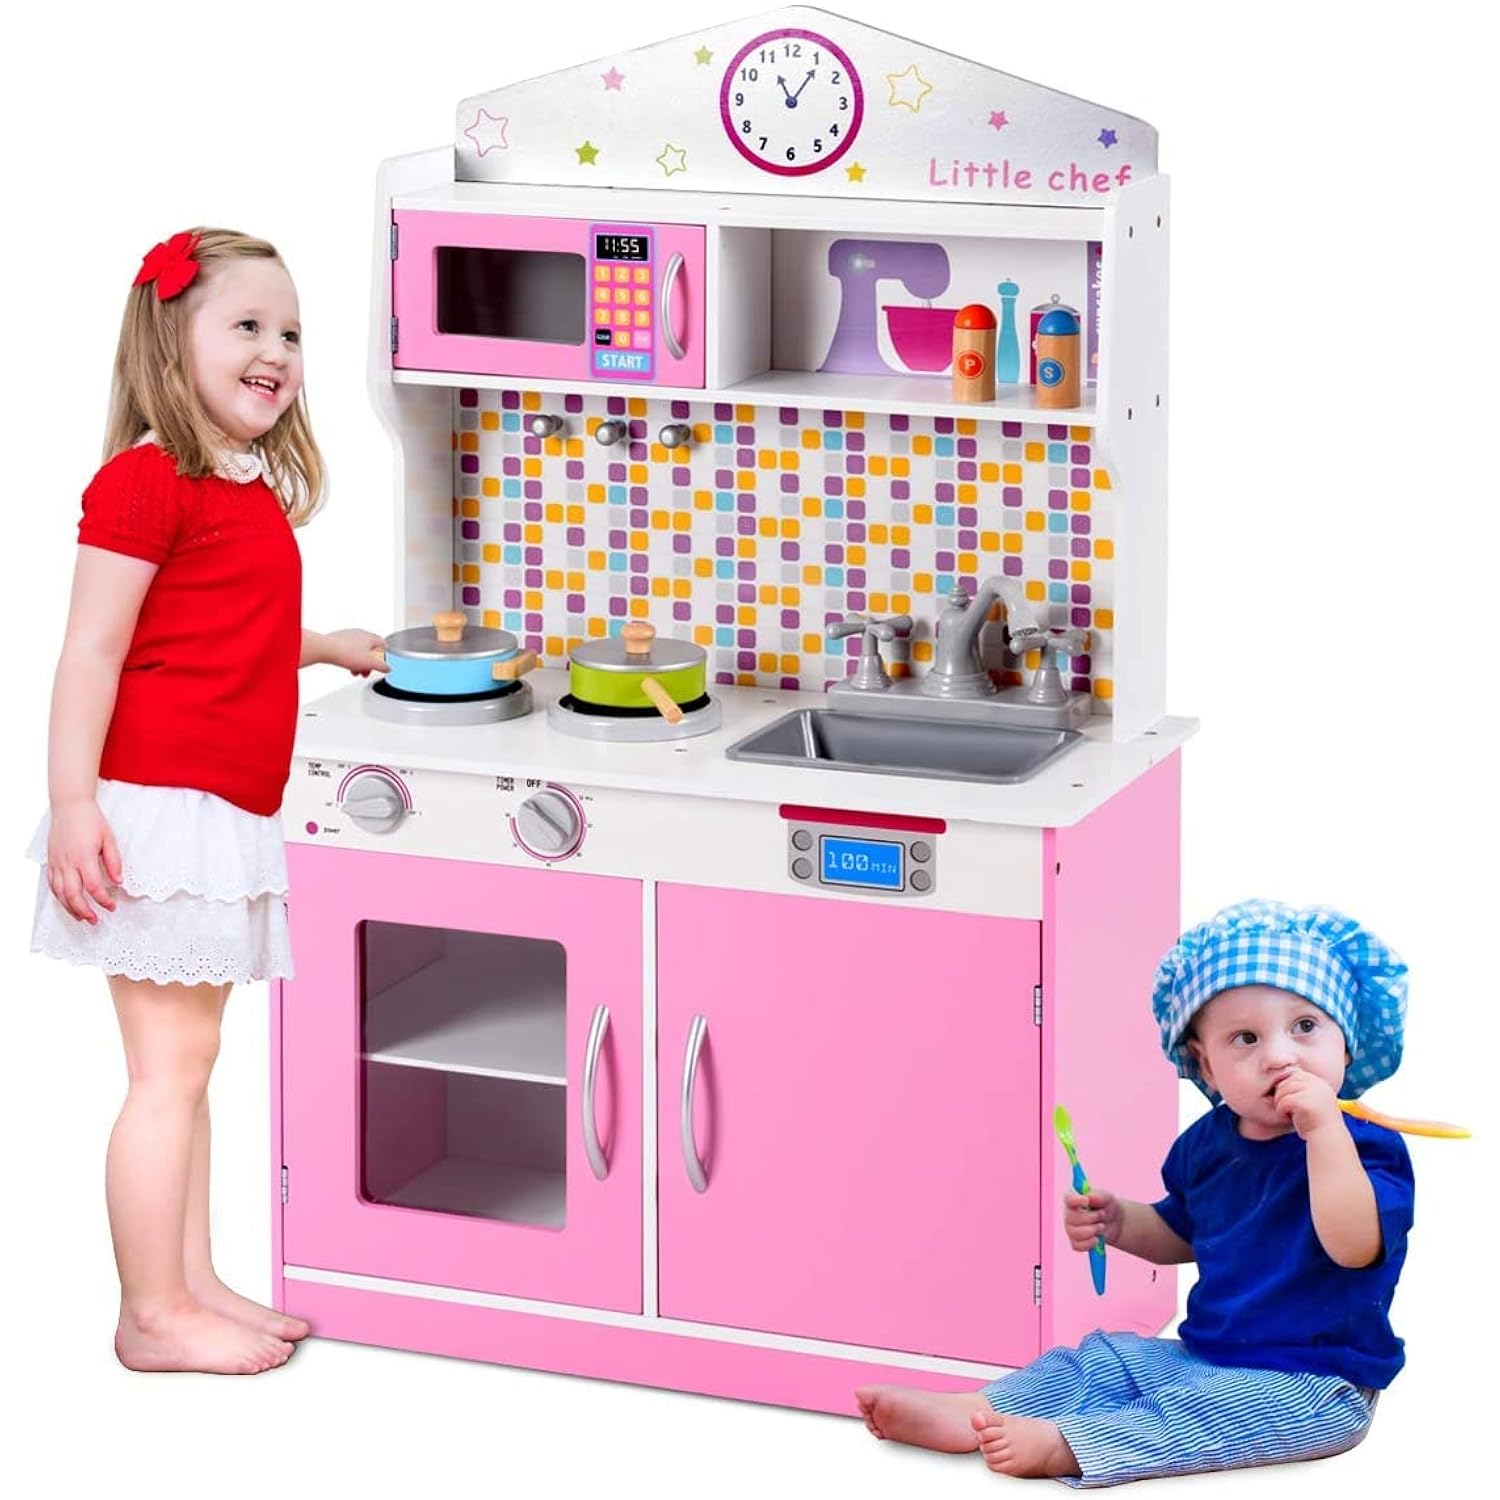 Great Choice Products Kids Kitchen Playset, Wooden Toy Kitchen W/ Removable Sink, Microwave, Cookware, Large Storage Cabinet, Pretend Play Kit…